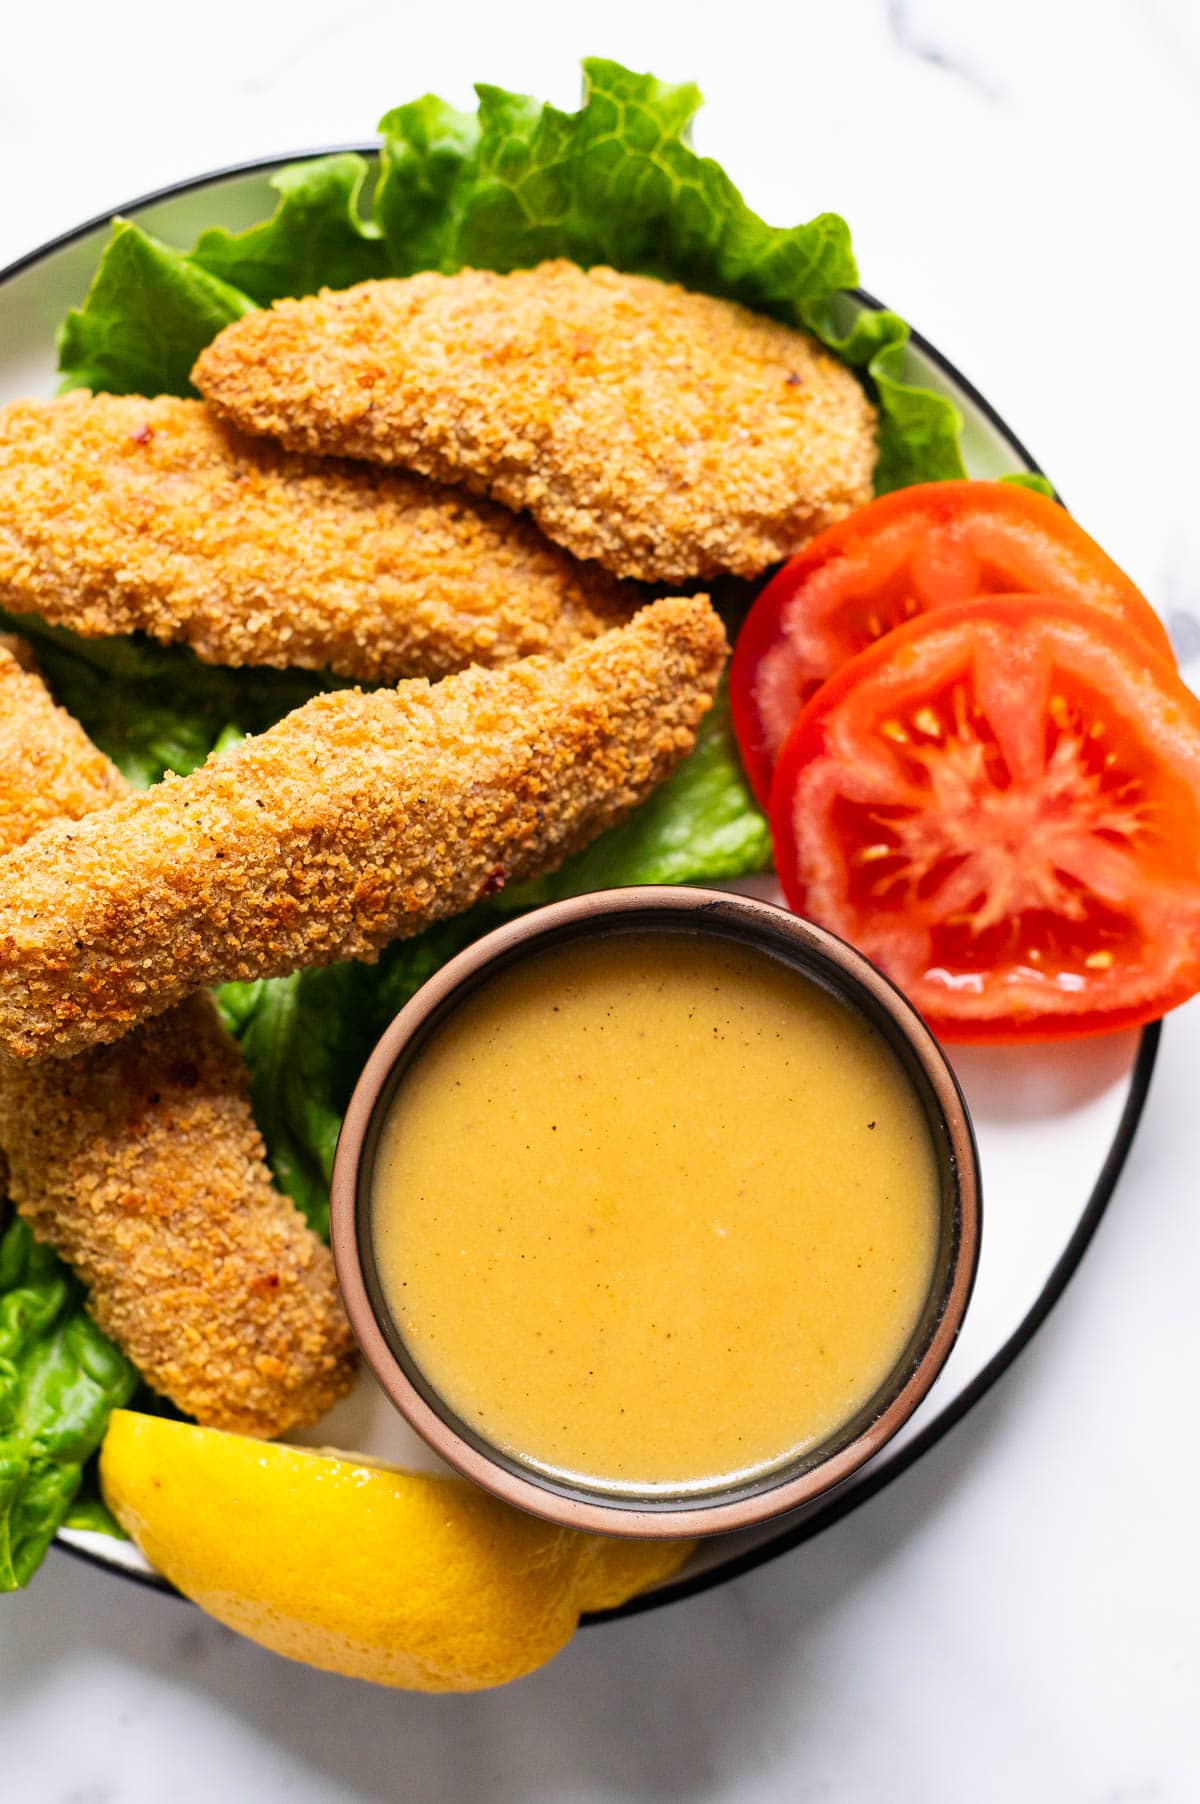 Healthy honey mustard dressing in a bowl. Veggies and chicken strips on a plate.